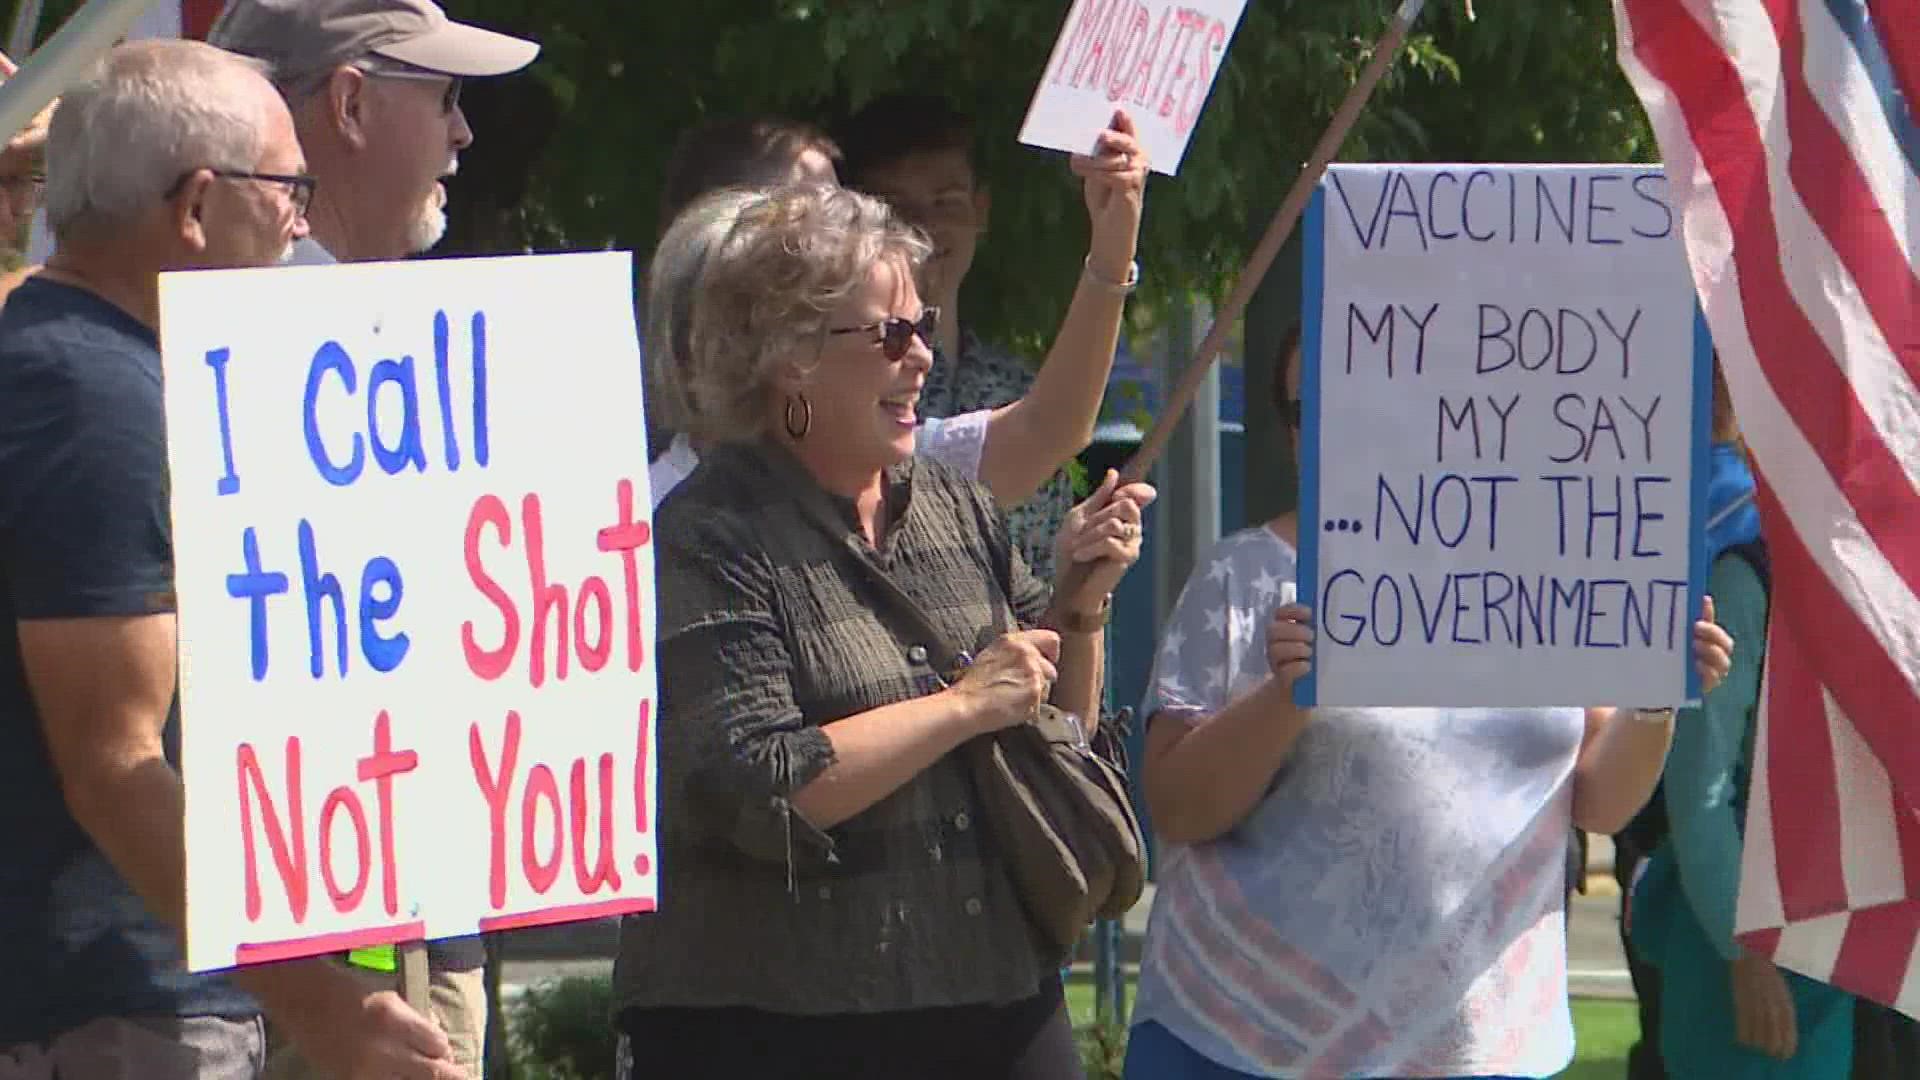 Demonstrators say they're not anti-vaccine. They're pro-choice.